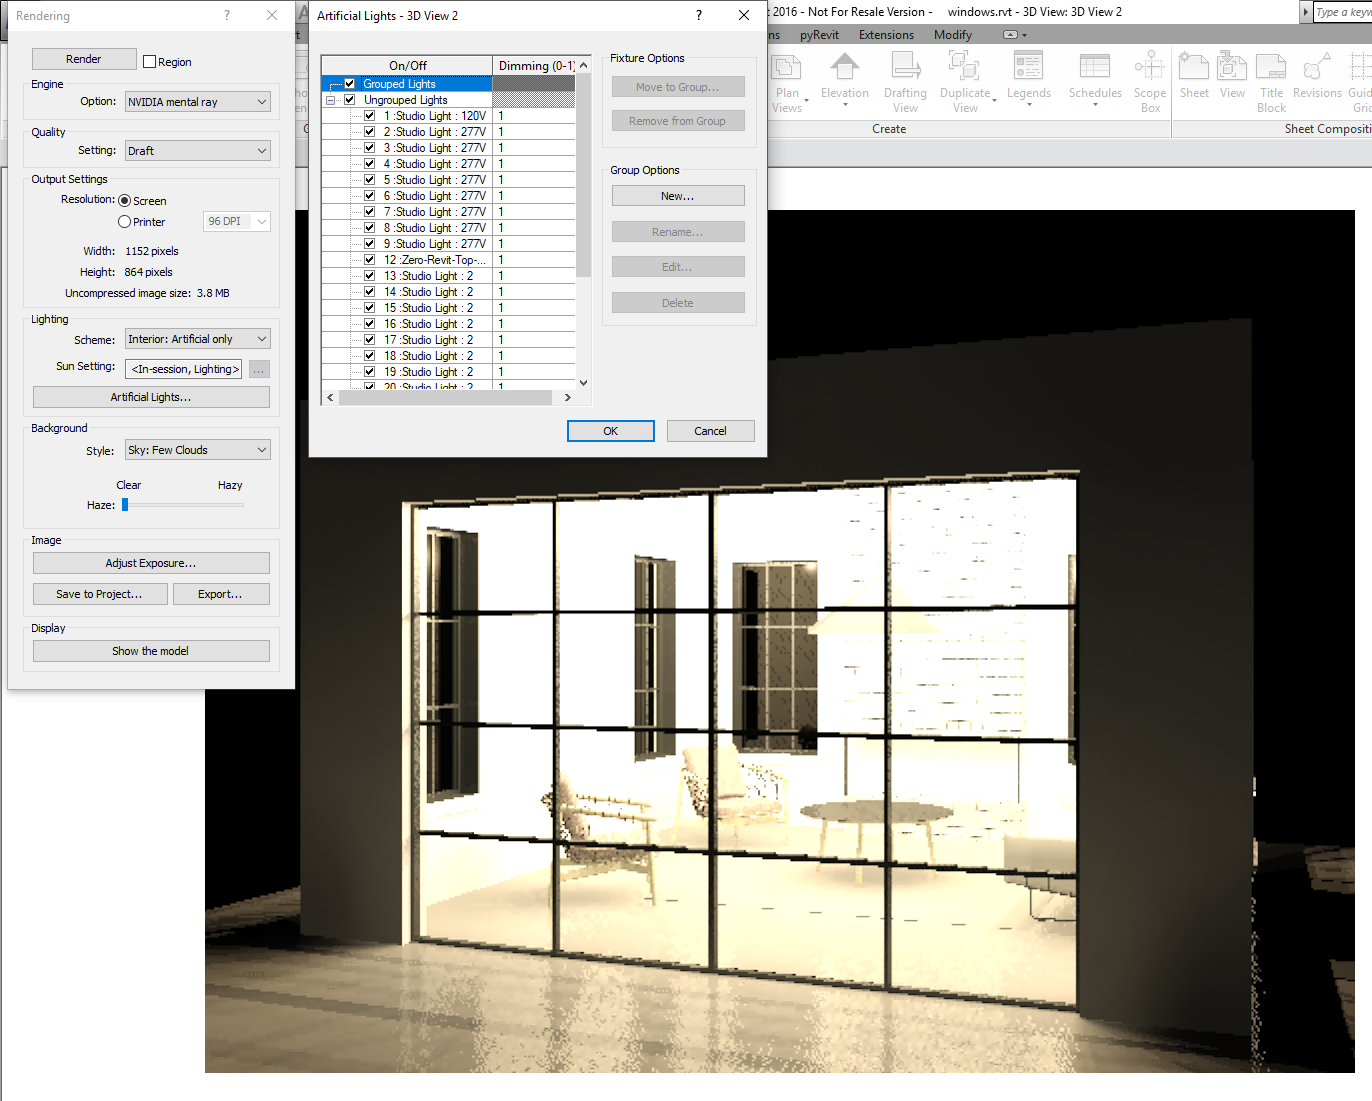 Artificial Lights not working - Autodesk Community - Revit Products